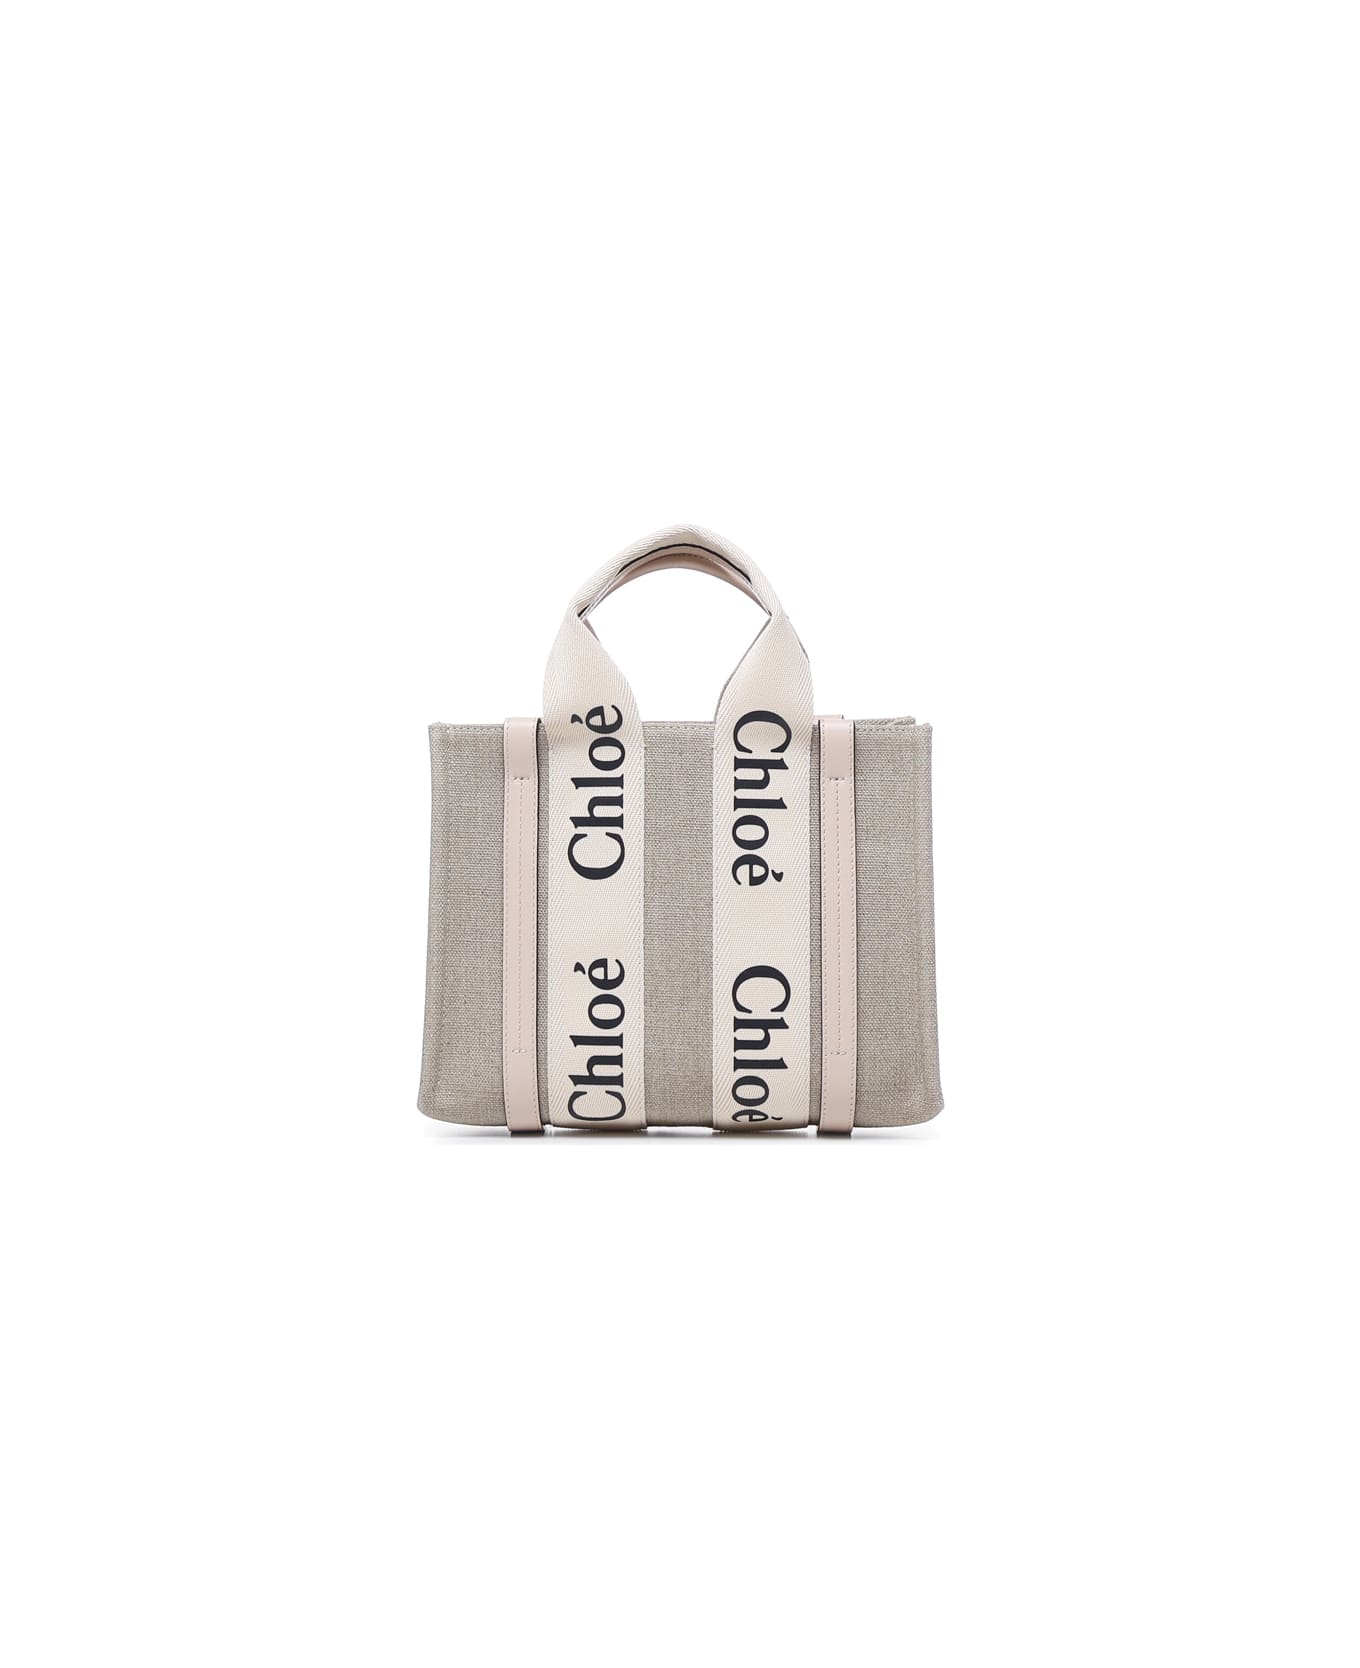 Chloé Small Woody Tote Bag - Cement pink トートバッグ